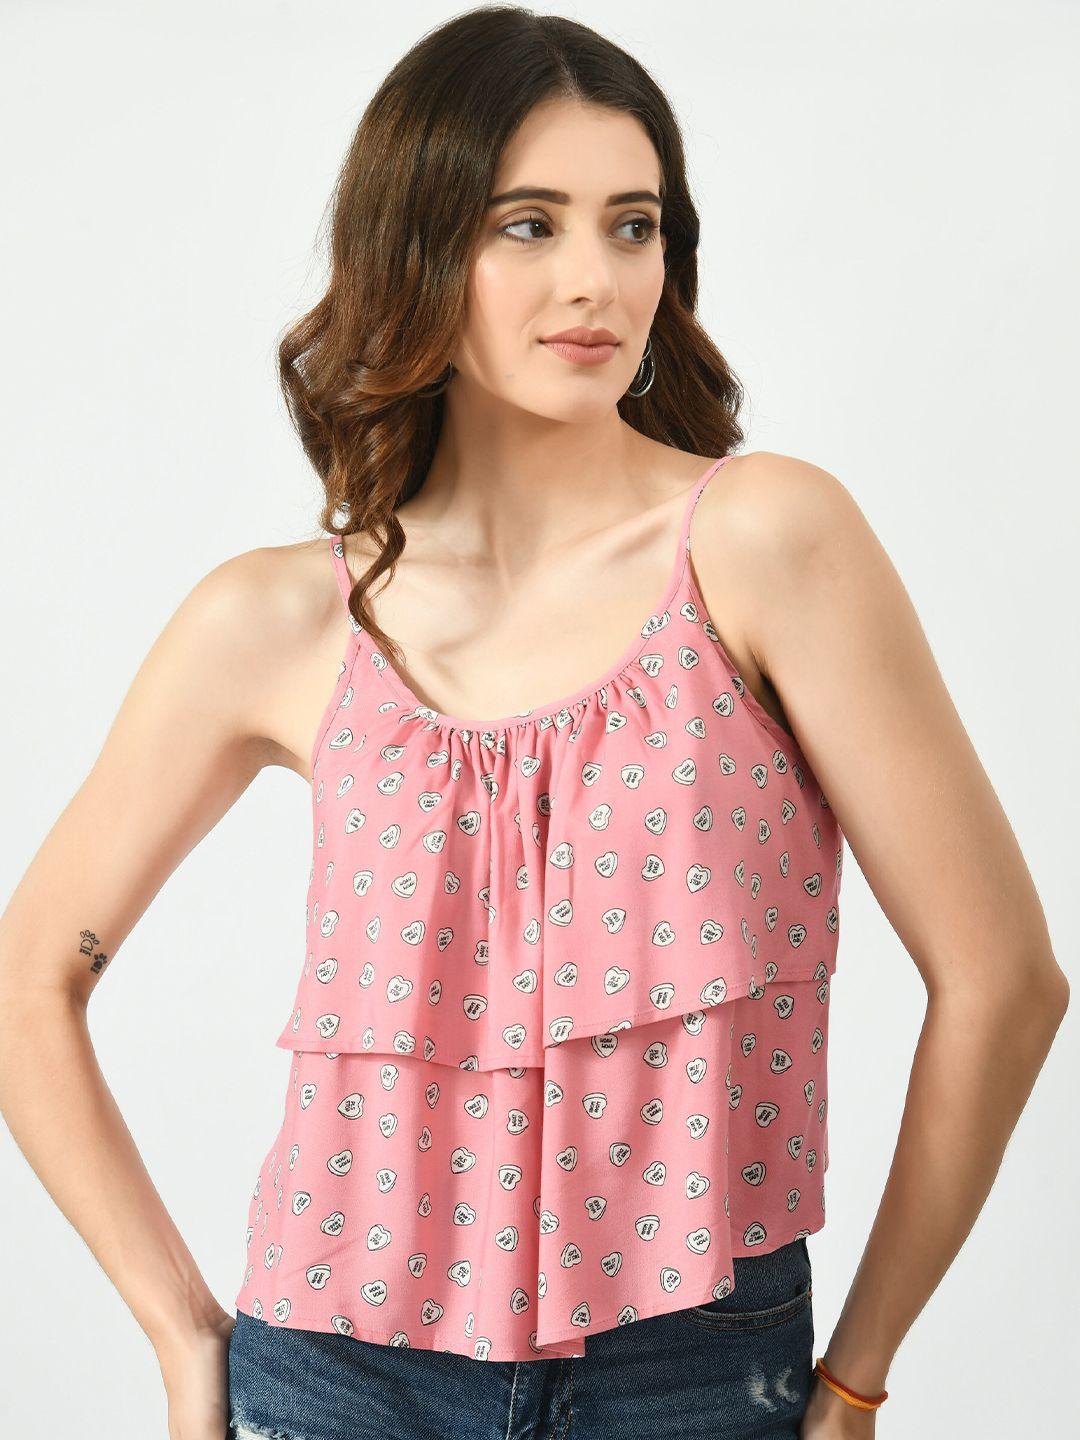 dressberry-pink-conversational-printed-layered-top